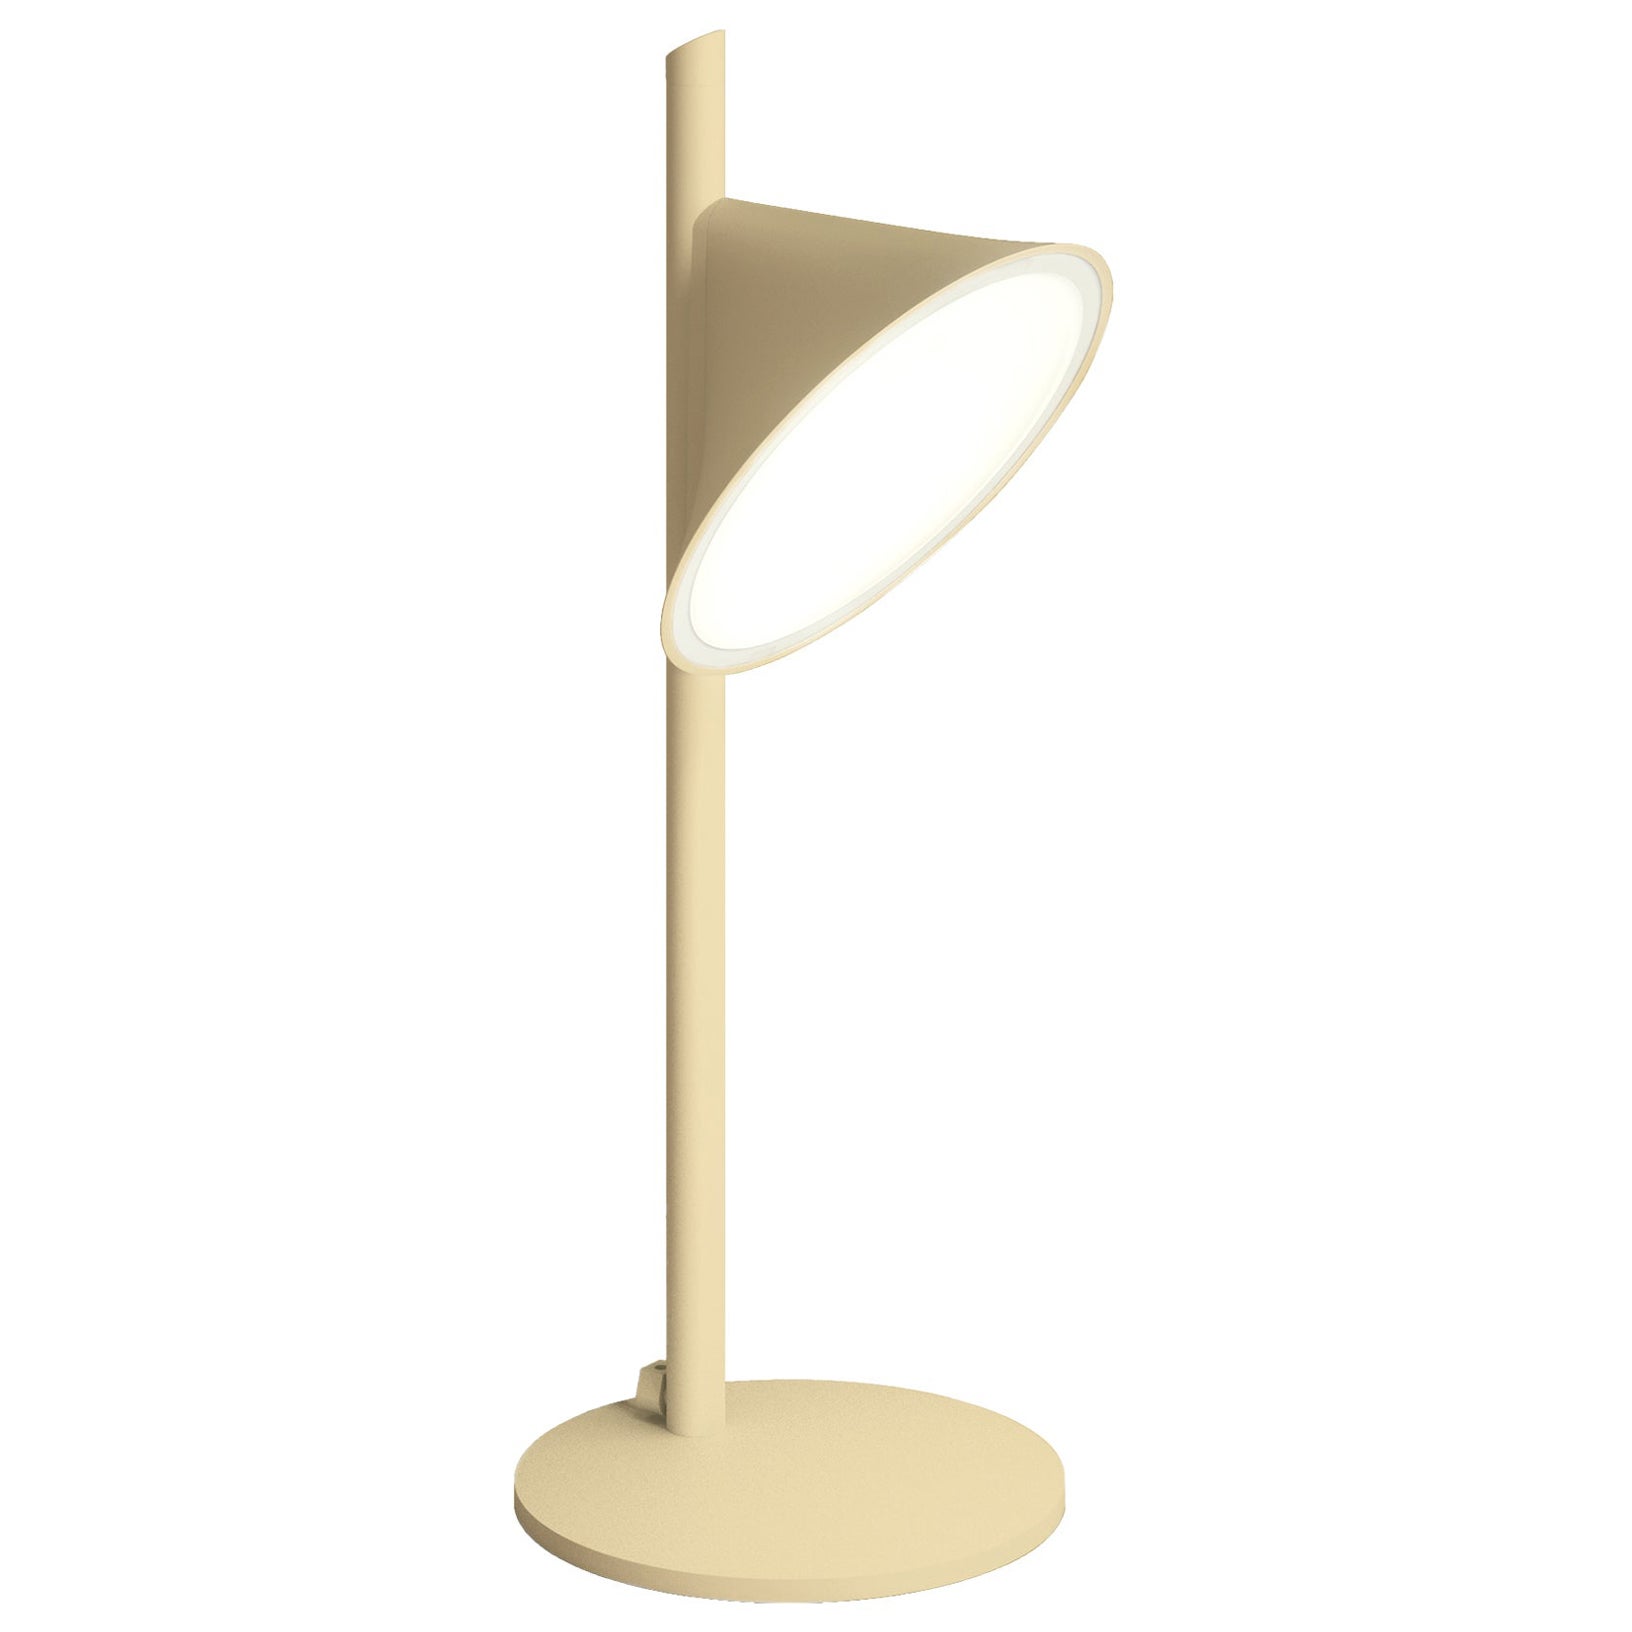 Axolight Orchid Table Lamp with Aluminum Body in Sand by Rainer Mutsch For Sale